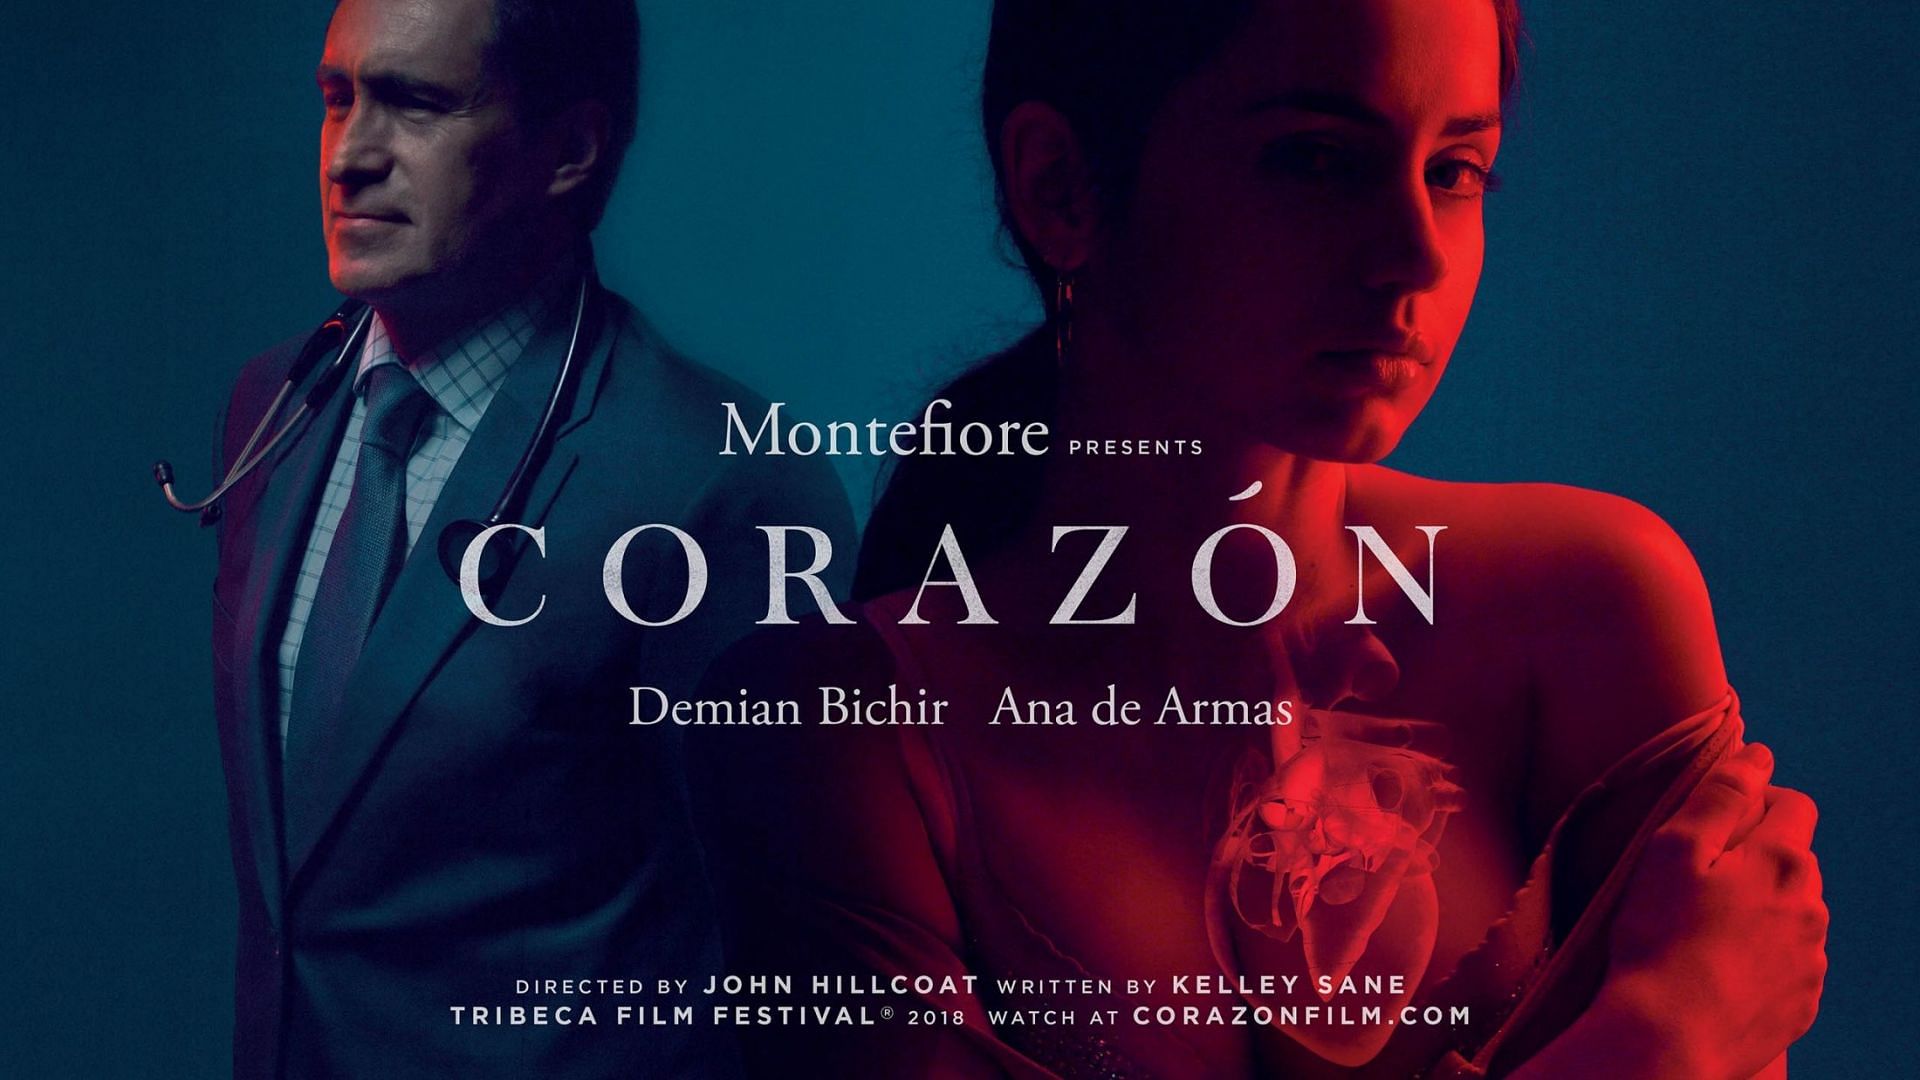 De Armas delivers a powerful and emotional performance as the mother, conveying a deep sense of love and determination in Coraz&oacute;n. (Image via corazonfilm.com)